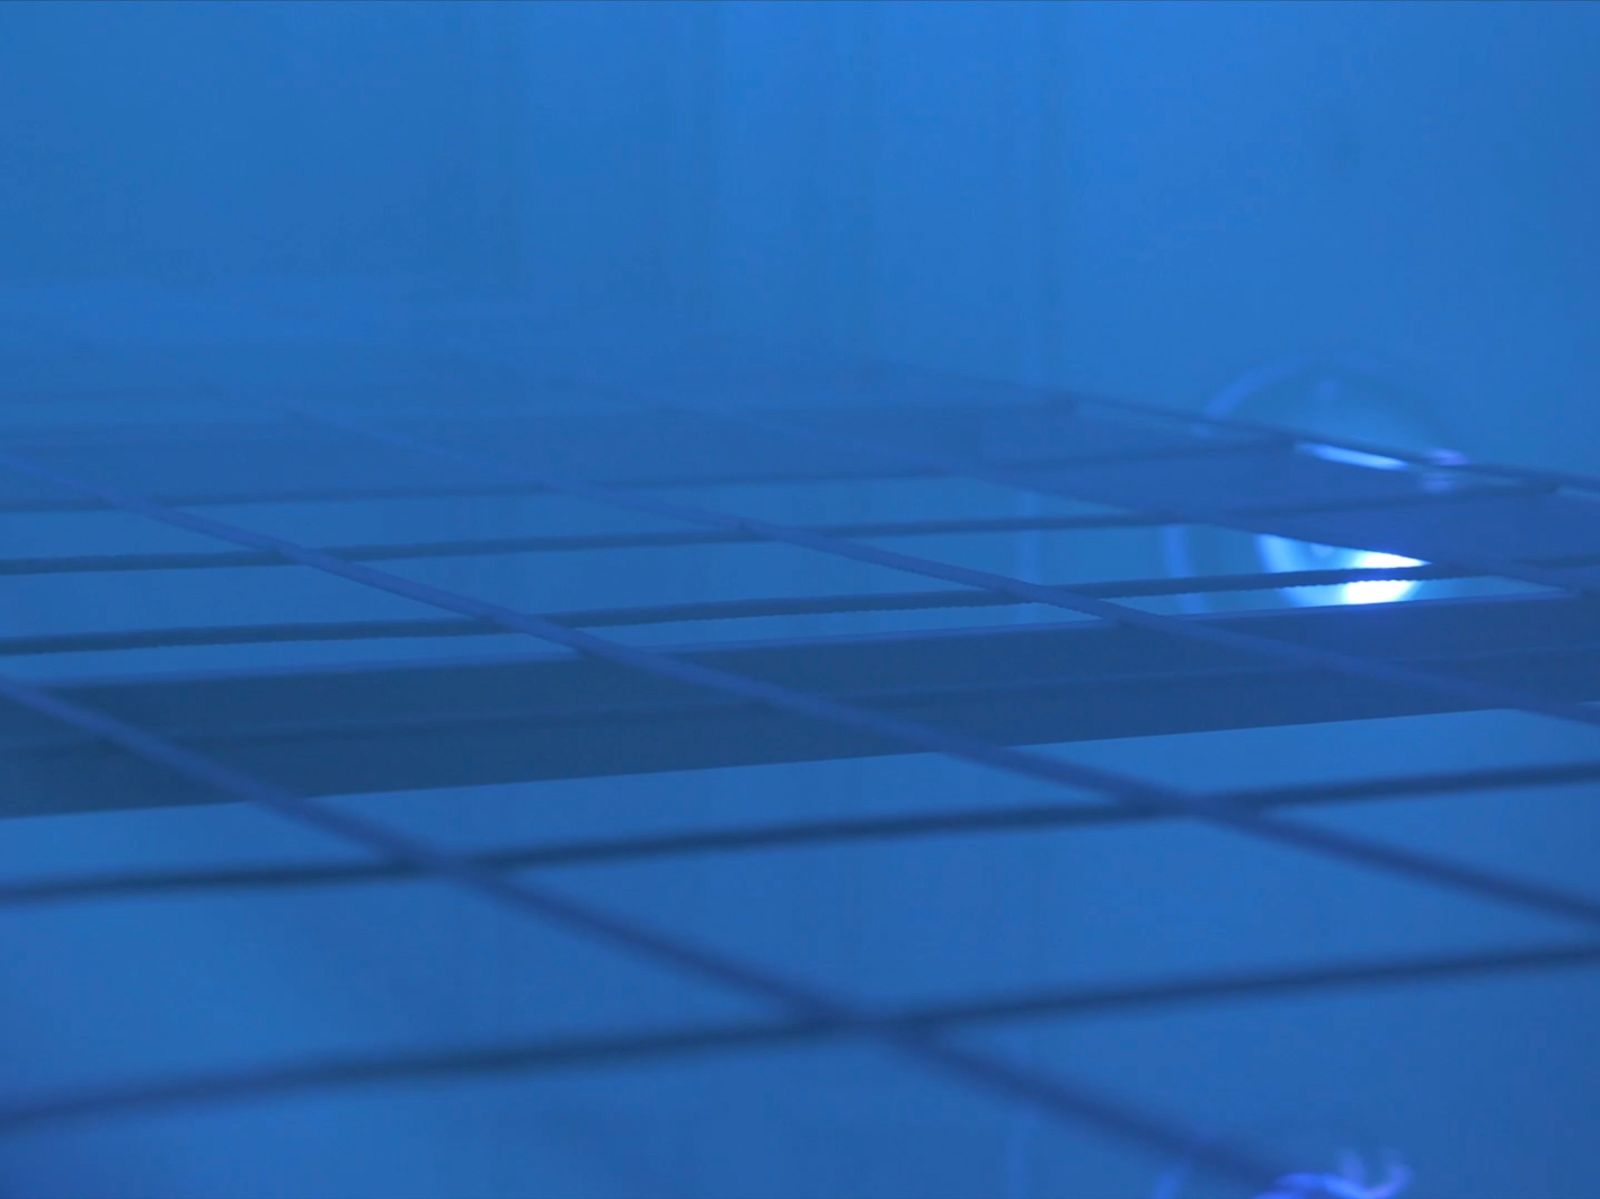 Close up of metal grid inside the Parla Physical Vapour Deposition machine - blue lighting.